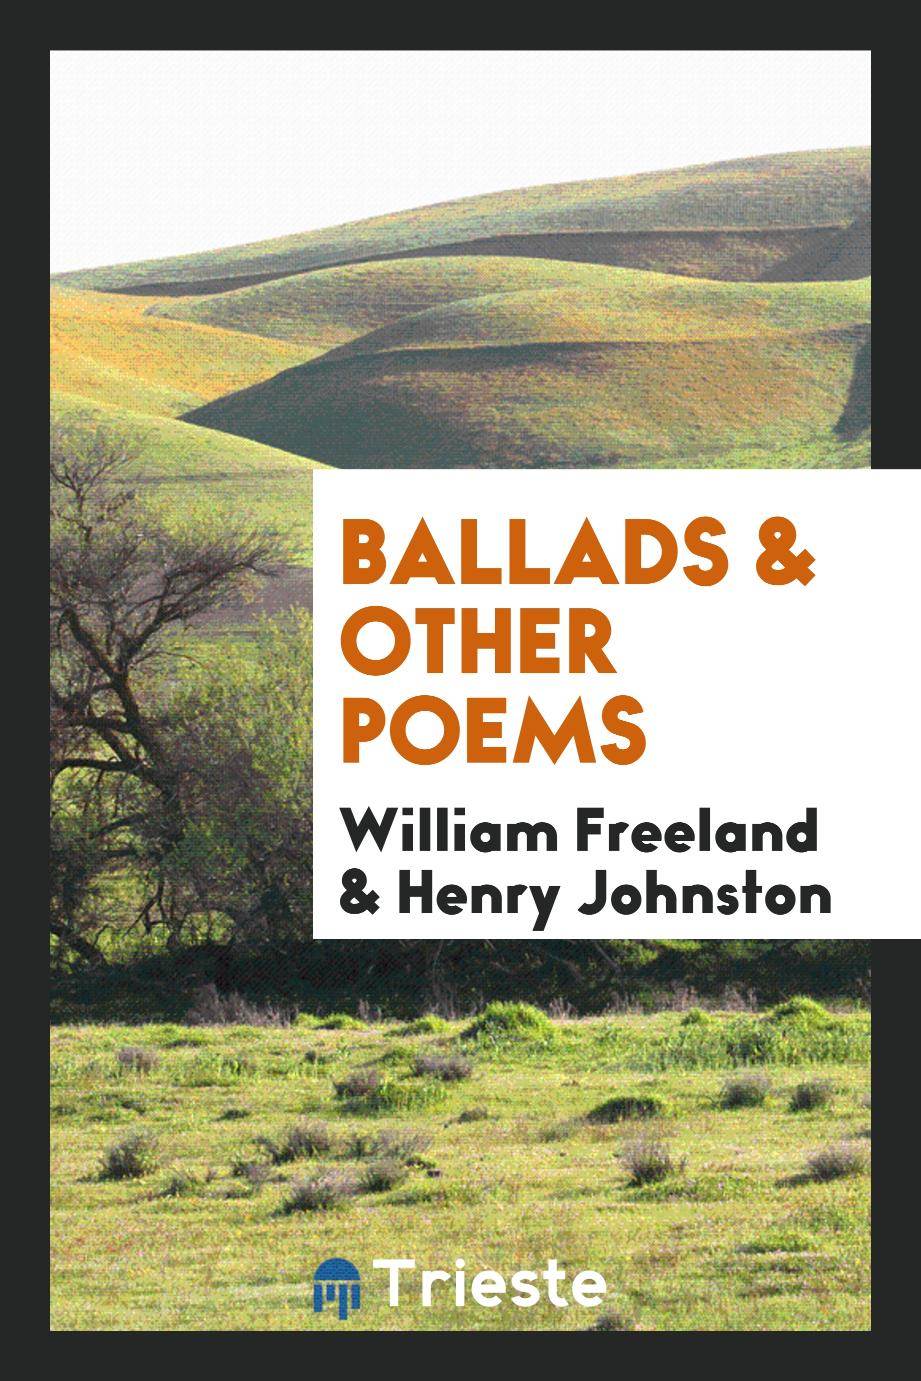 Ballads & other poems